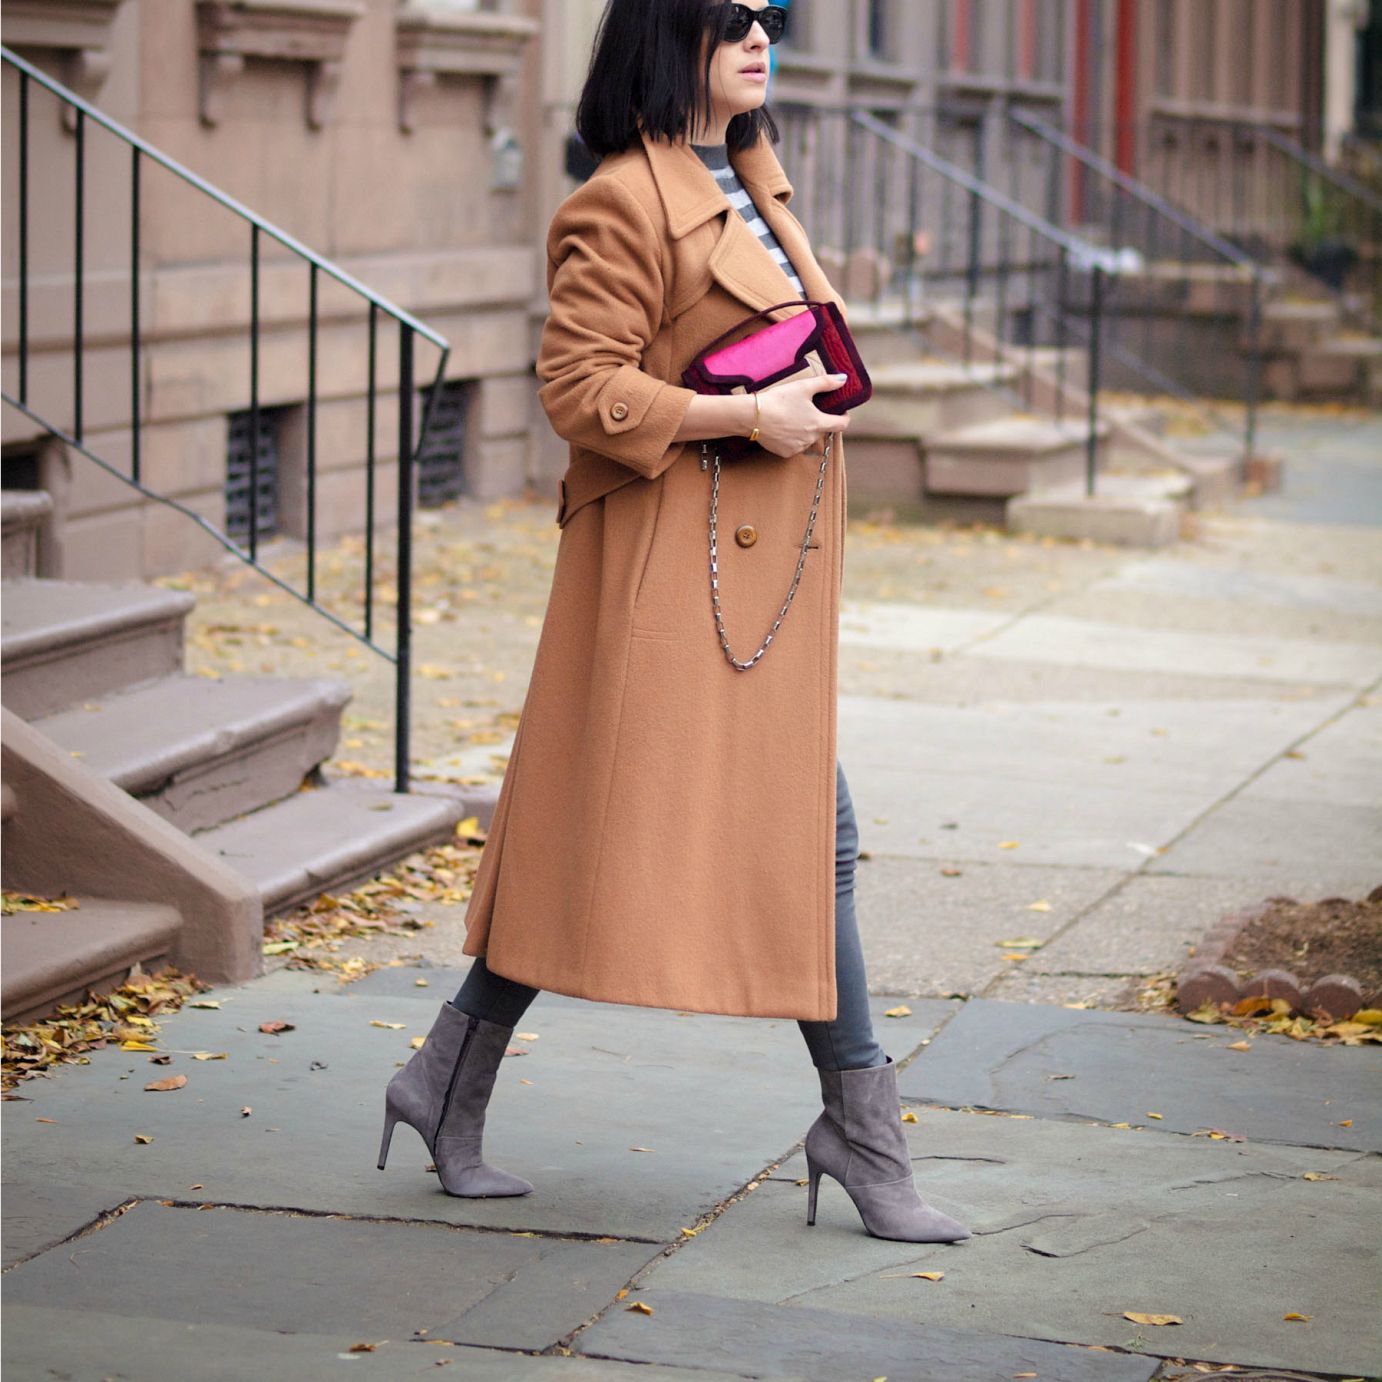 bittersweet colours, street style, fall coats, camel coat, camel and grey mix, pierre hardy bag, levis jeans, brandy pham jewelry, maternity style, baby bump, 25 weeks, sweater weather,